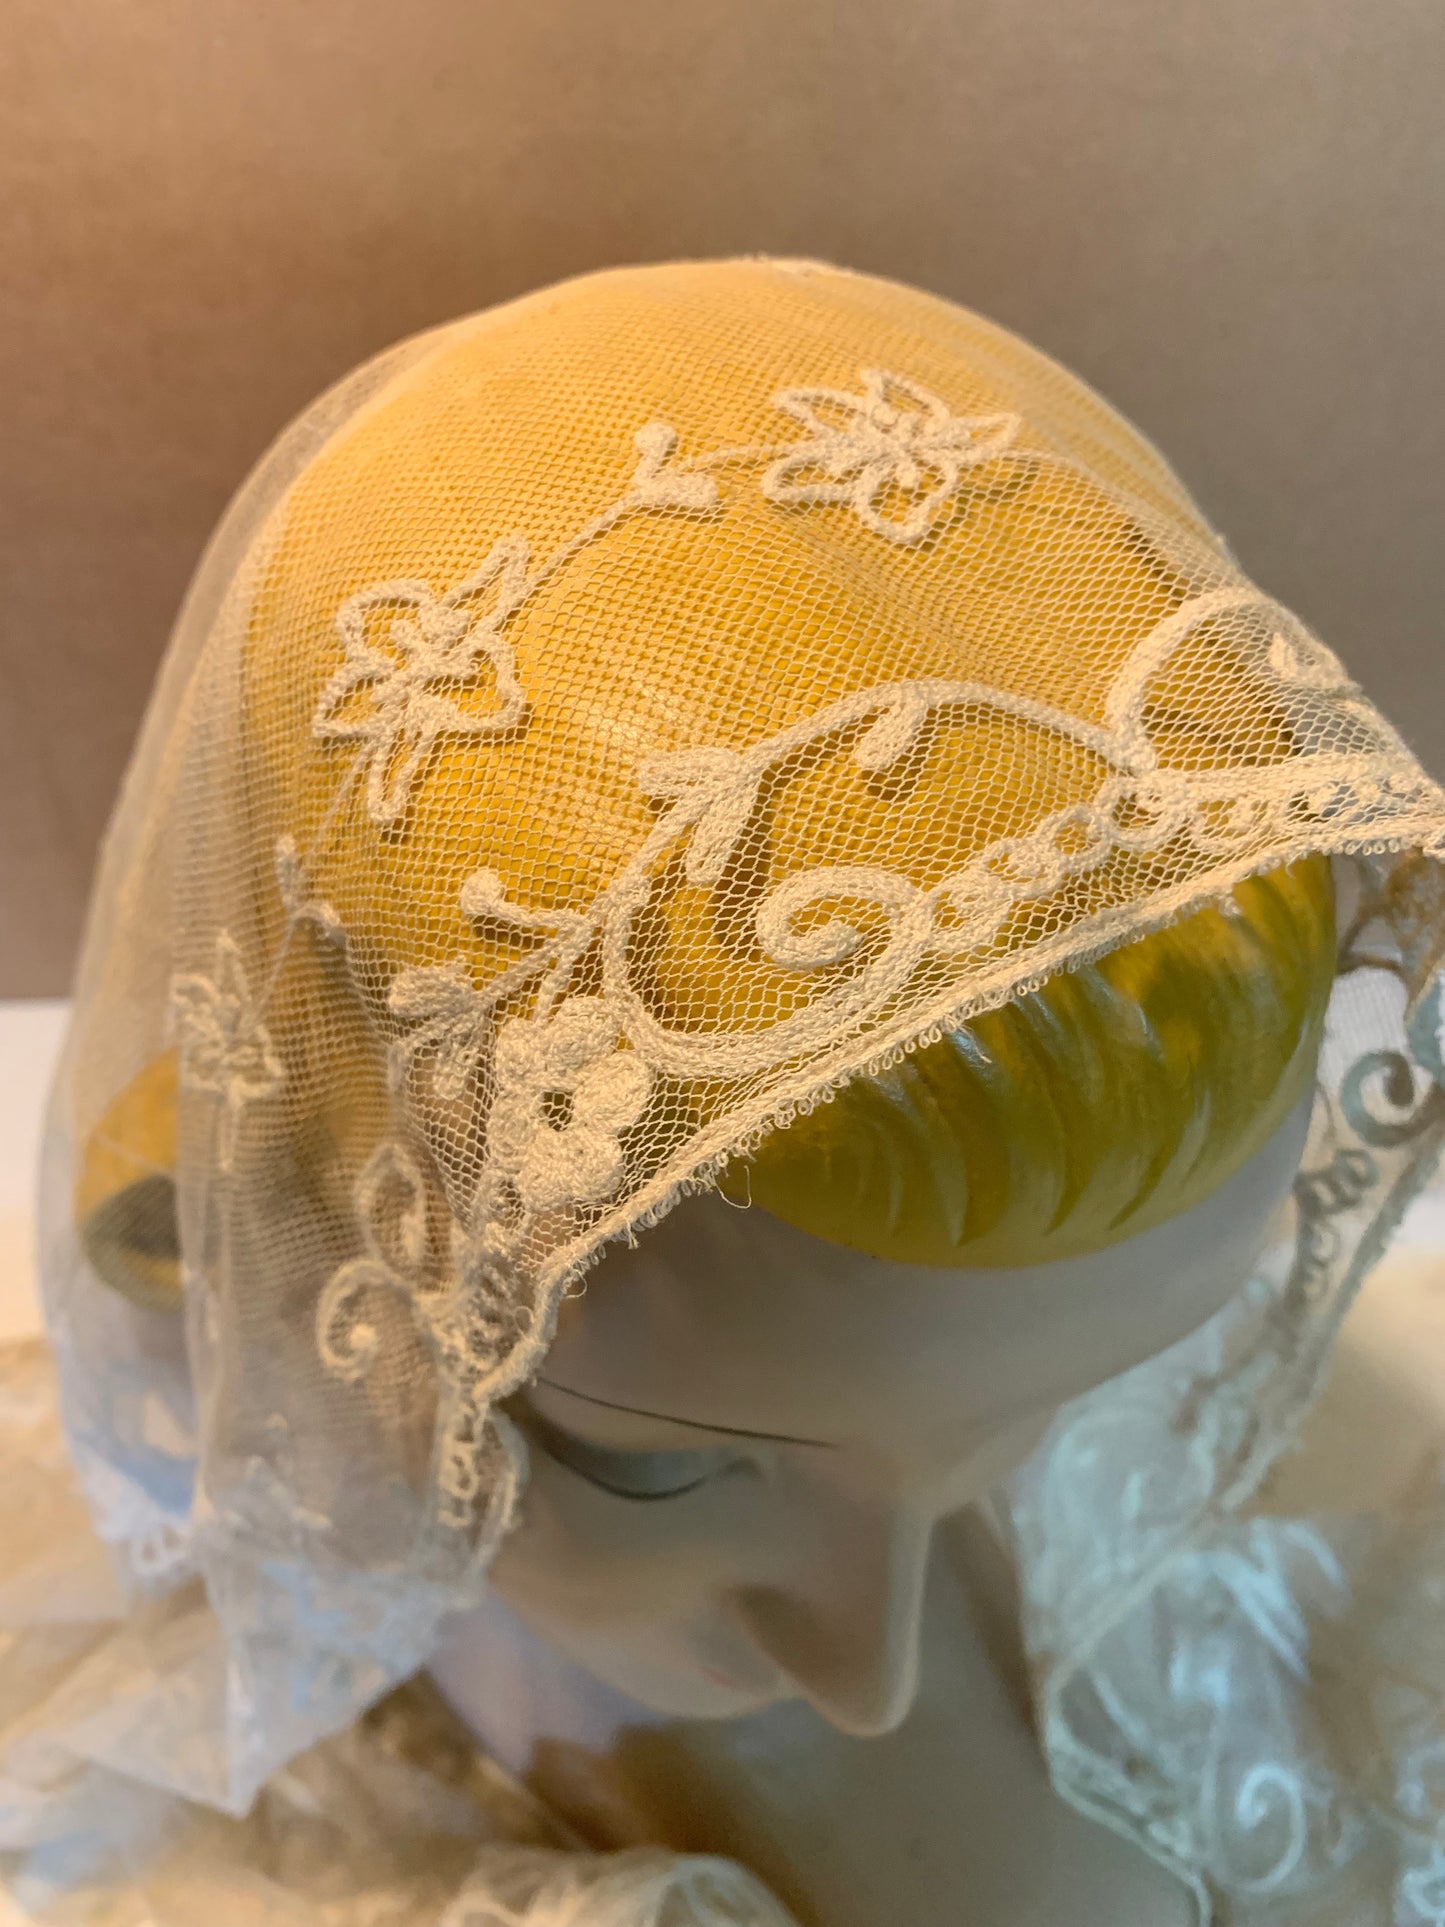 Soft Ivory Embroidered Mesh Lace Shawl or Head Piece circa 1800s